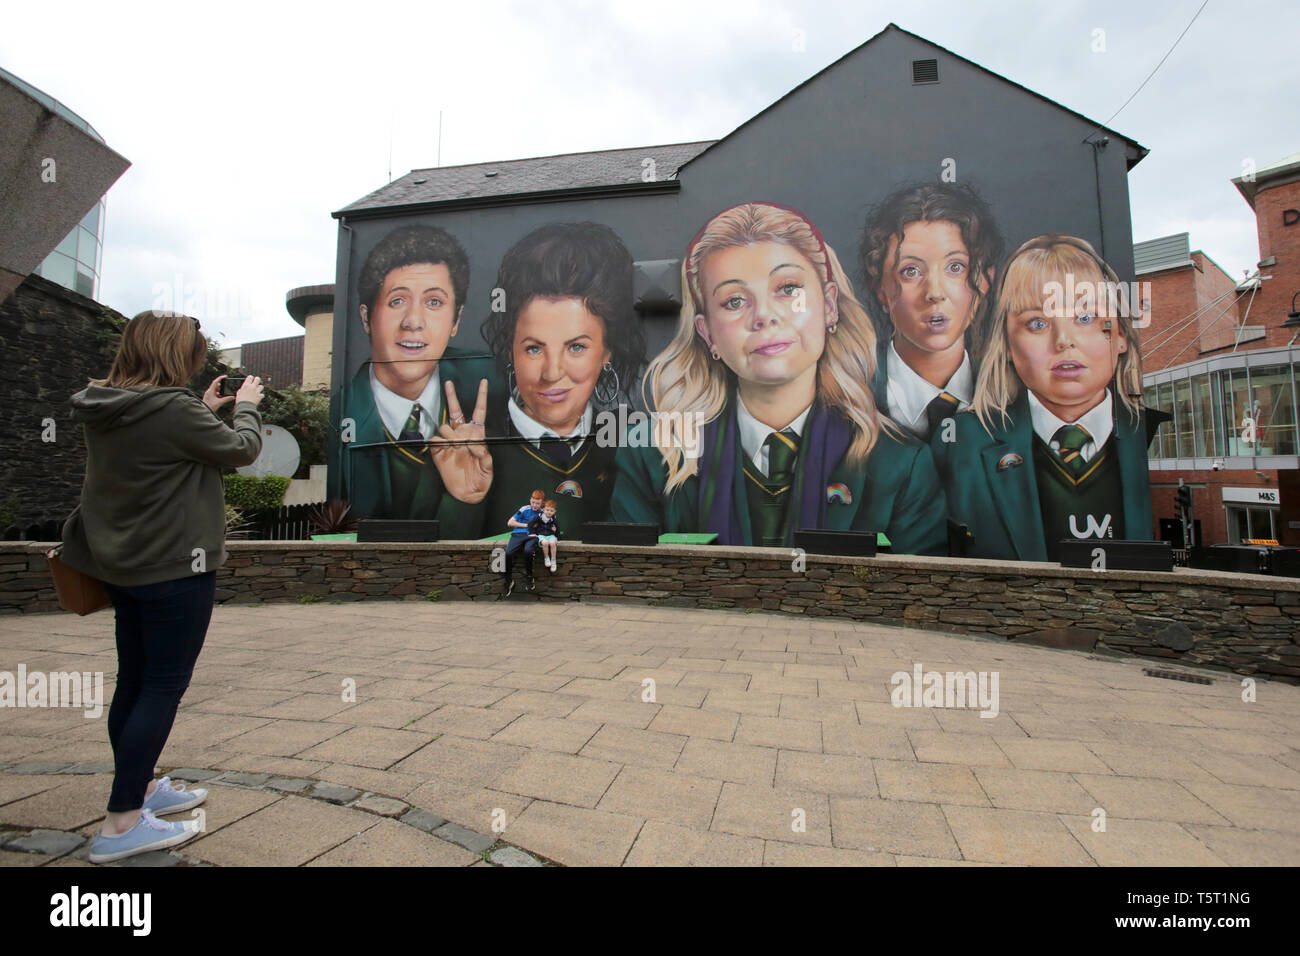 Derry, County Londonderry, Northern Ireland, 25th April, 2019 .A family poses in front the Channel 4 hit TV show Derry Girls Mural in Derry/Londonderry, Northern Ireland. Derry Girls is a British television sitcom created and written by Lisa McGee. Staring Erin (Saoirse-Monica Jackson), her cousin Orla (Louisa Harland) and their friends Clare (Nicola Coughlan), Michelle (Jamie-Lee O'Donnell) and Michelle's English cousin James (Dylan Llewellyn) navigate their teen years during the Troubles in Derry, where they all attend a Catholic girls' secondary school. Erin lives with her father, Gerry; he Stock Photo